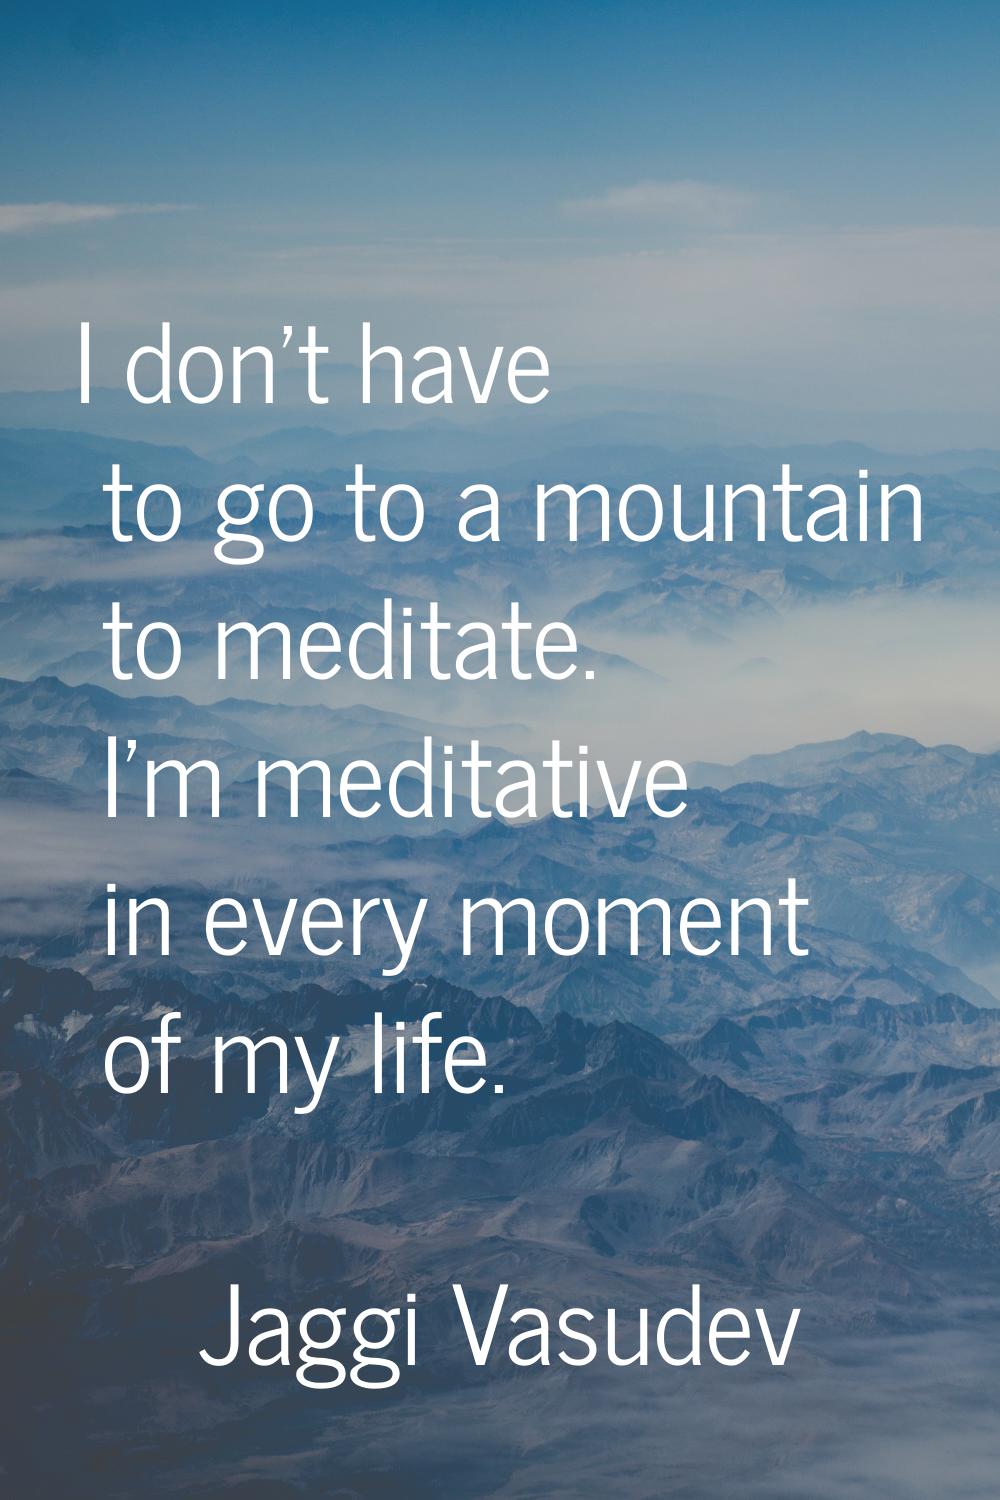 I don't have to go to a mountain to meditate. I'm meditative in every moment of my life.